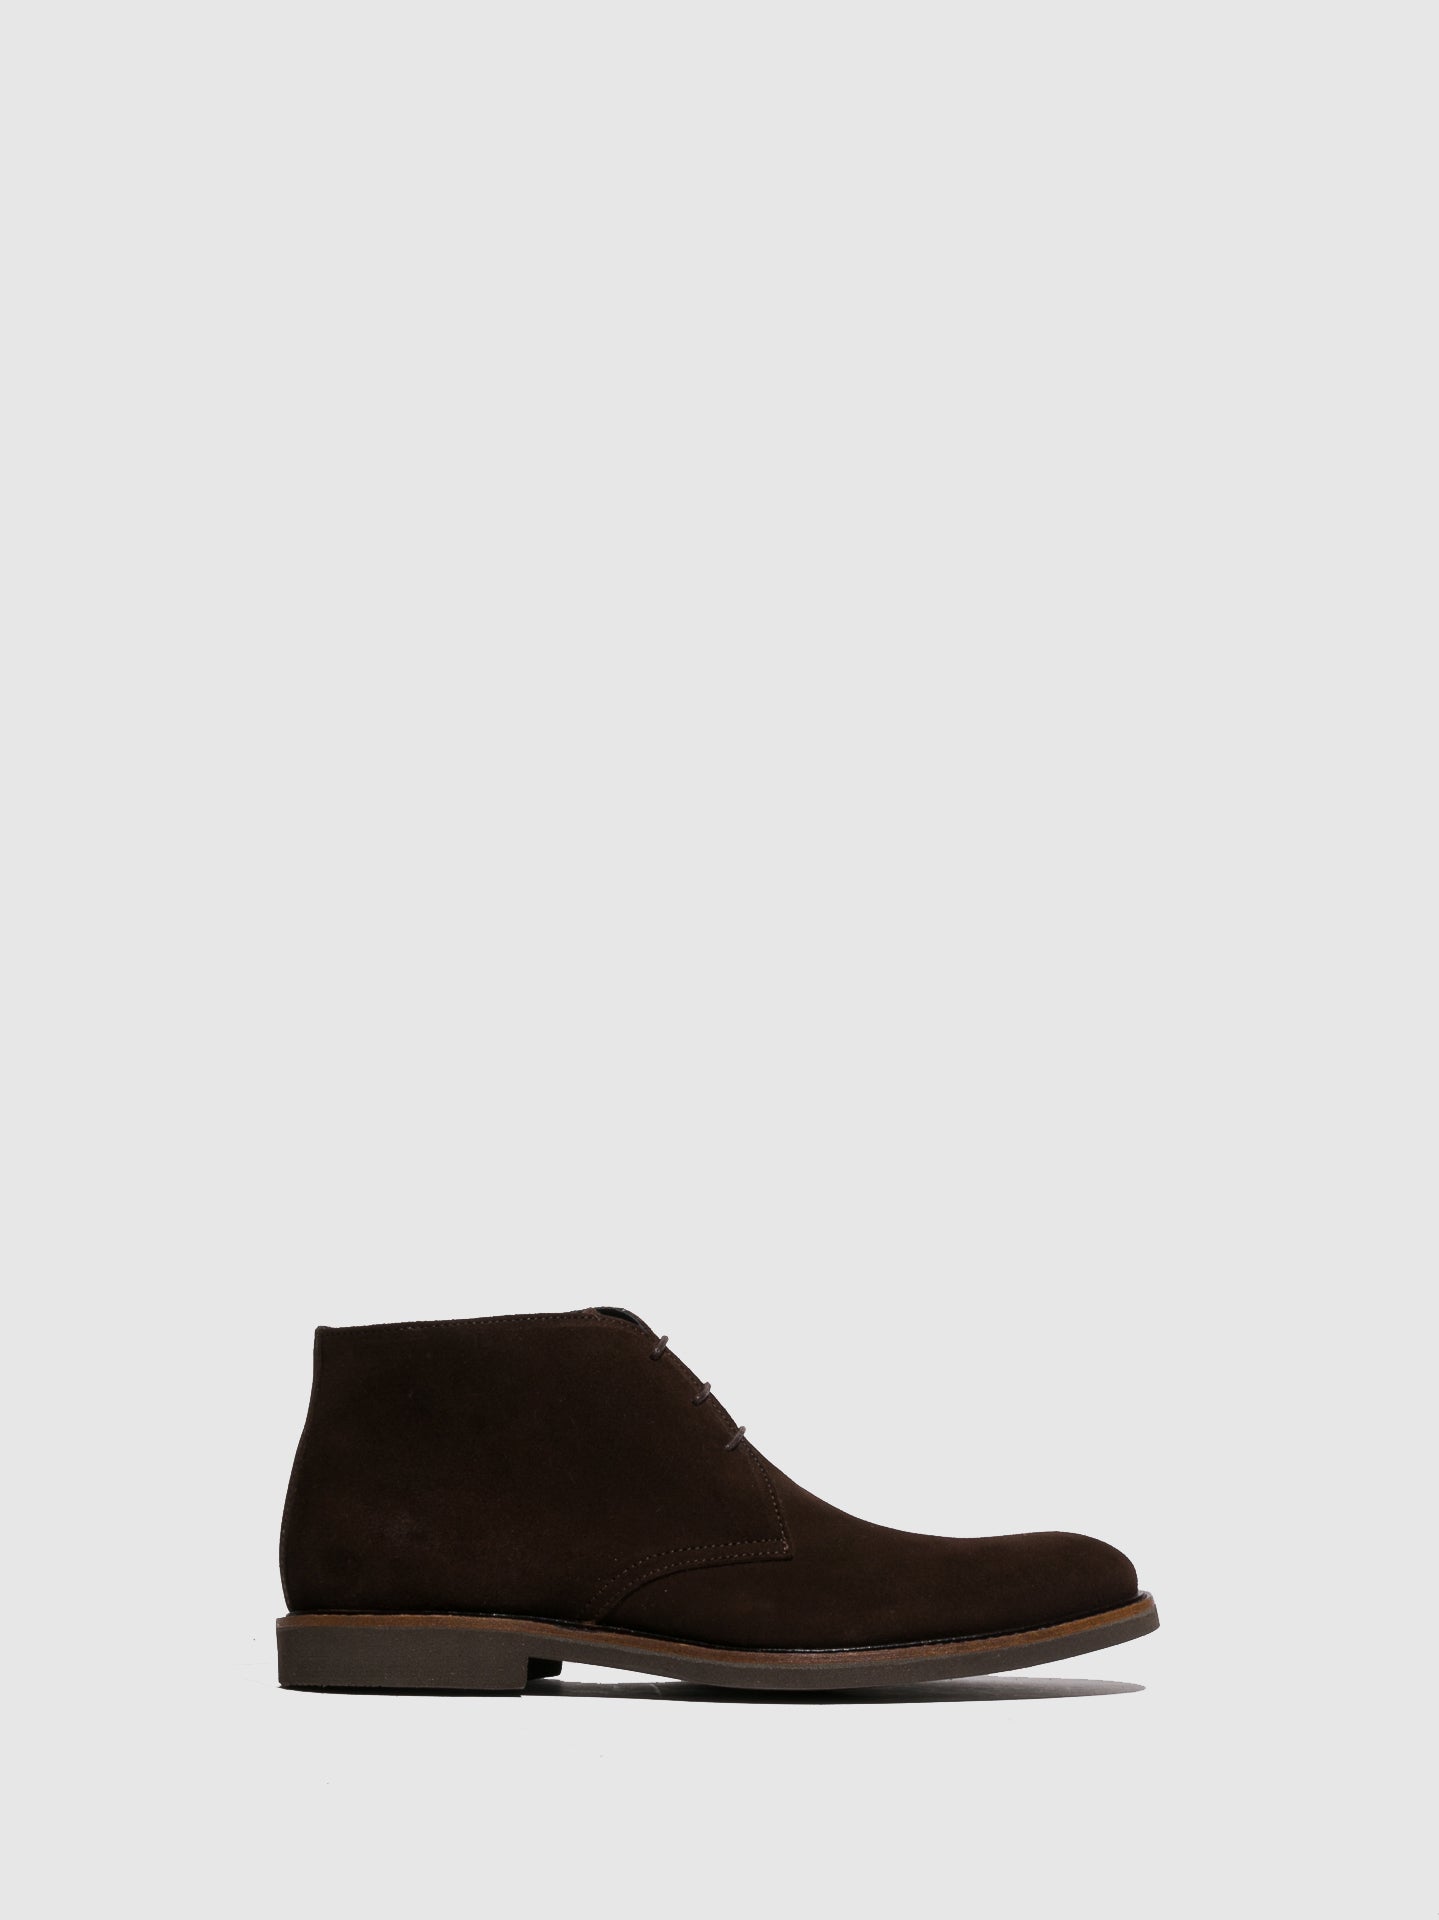 Foreva Brown Elasticated Ankle Boots